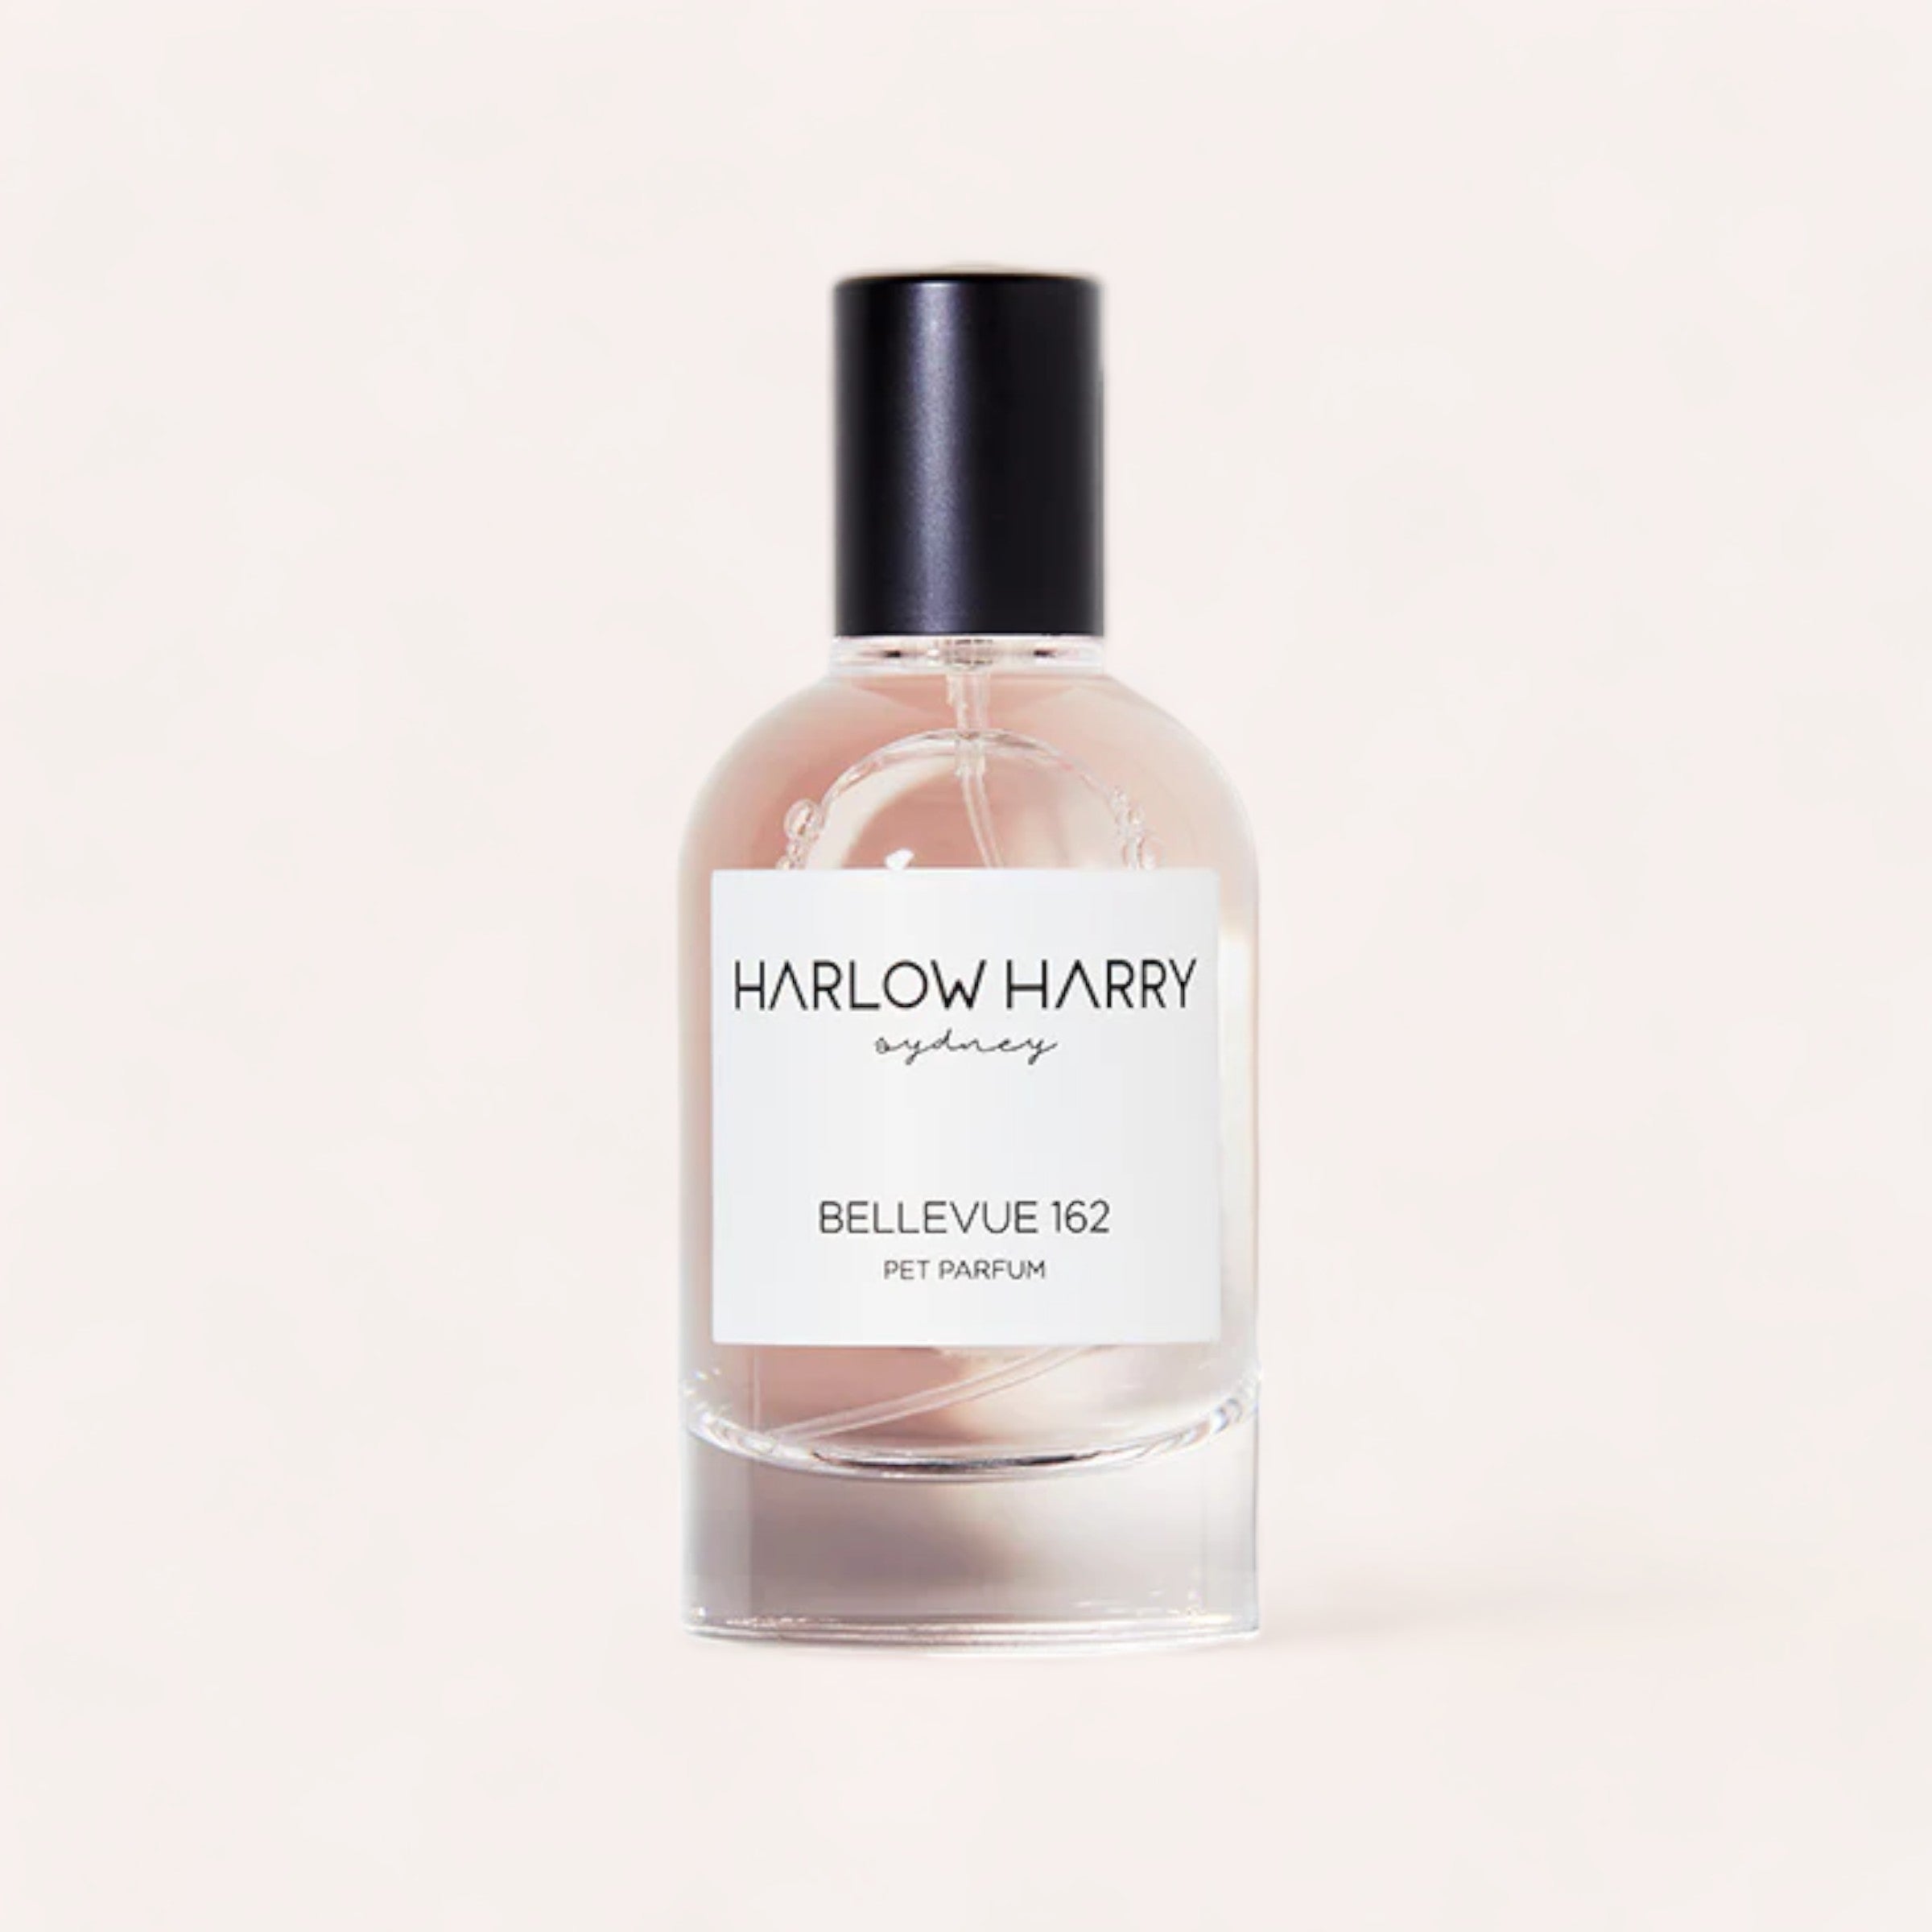 A sleek bottle of Harlow Harry dog perfume labeled "Bellevue 162" against a clean, light background.